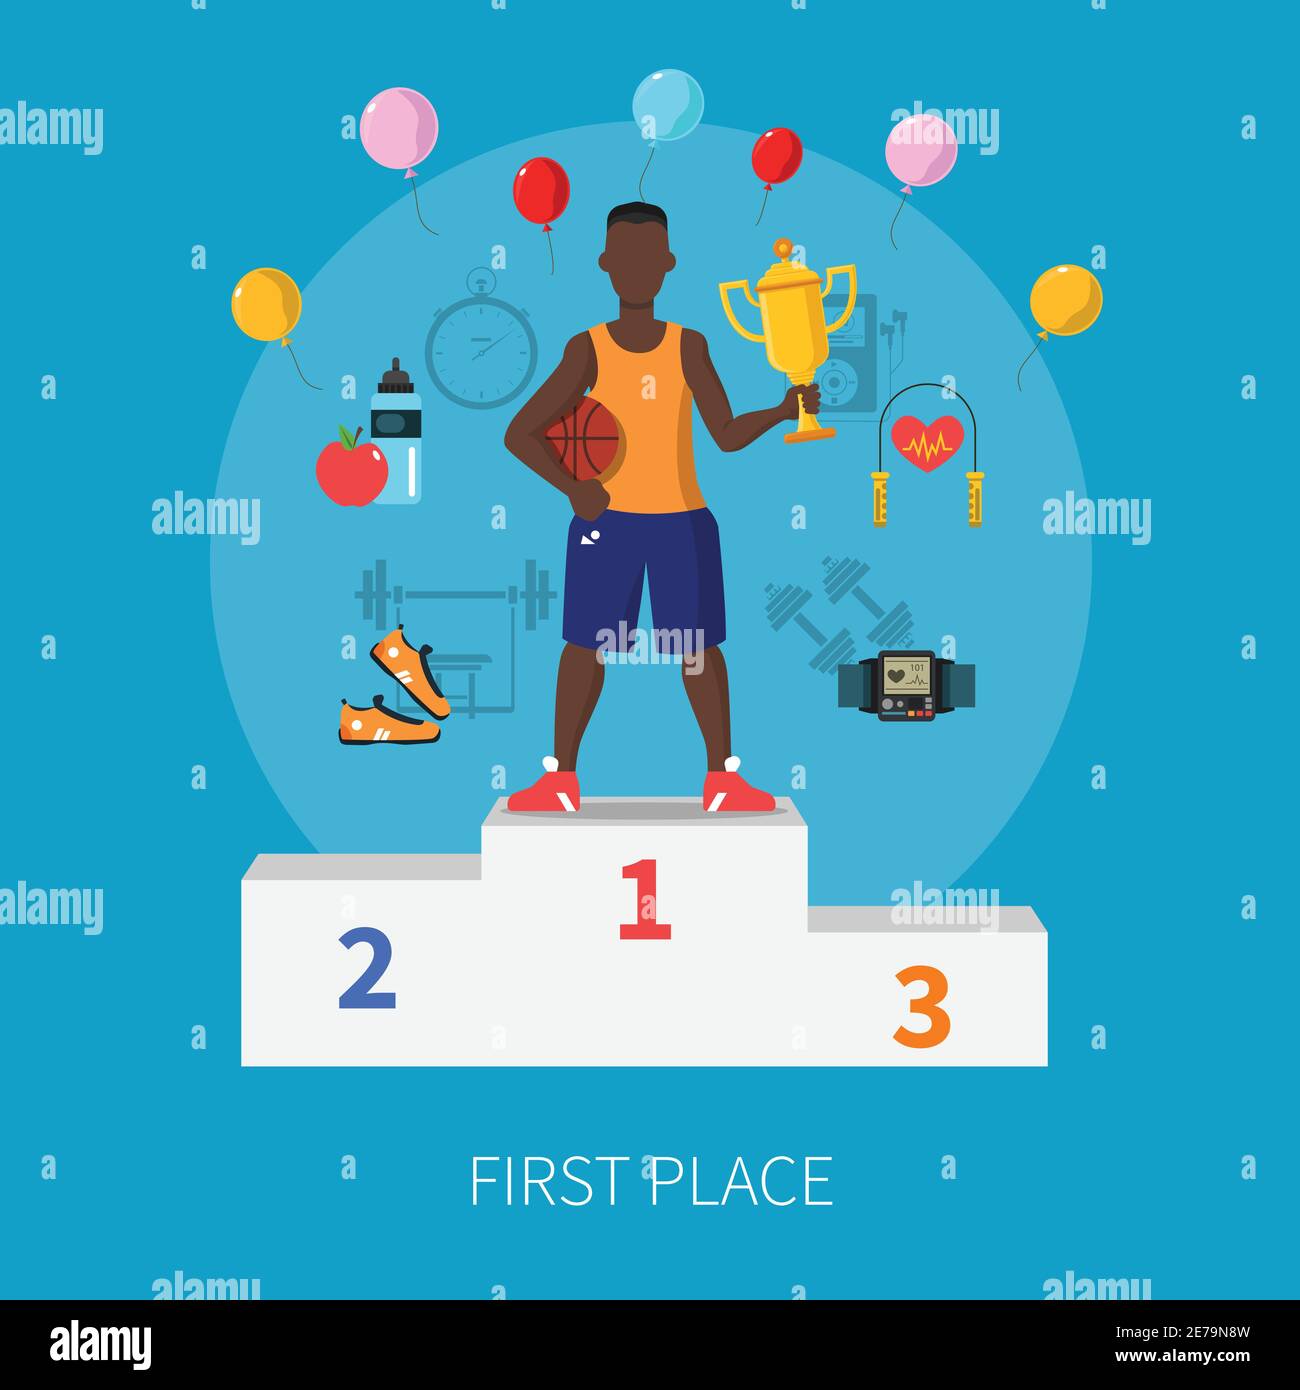 Sport Winner Concept With First Place Symbols On Blue Background Flat Vector Illustration Stock 4714